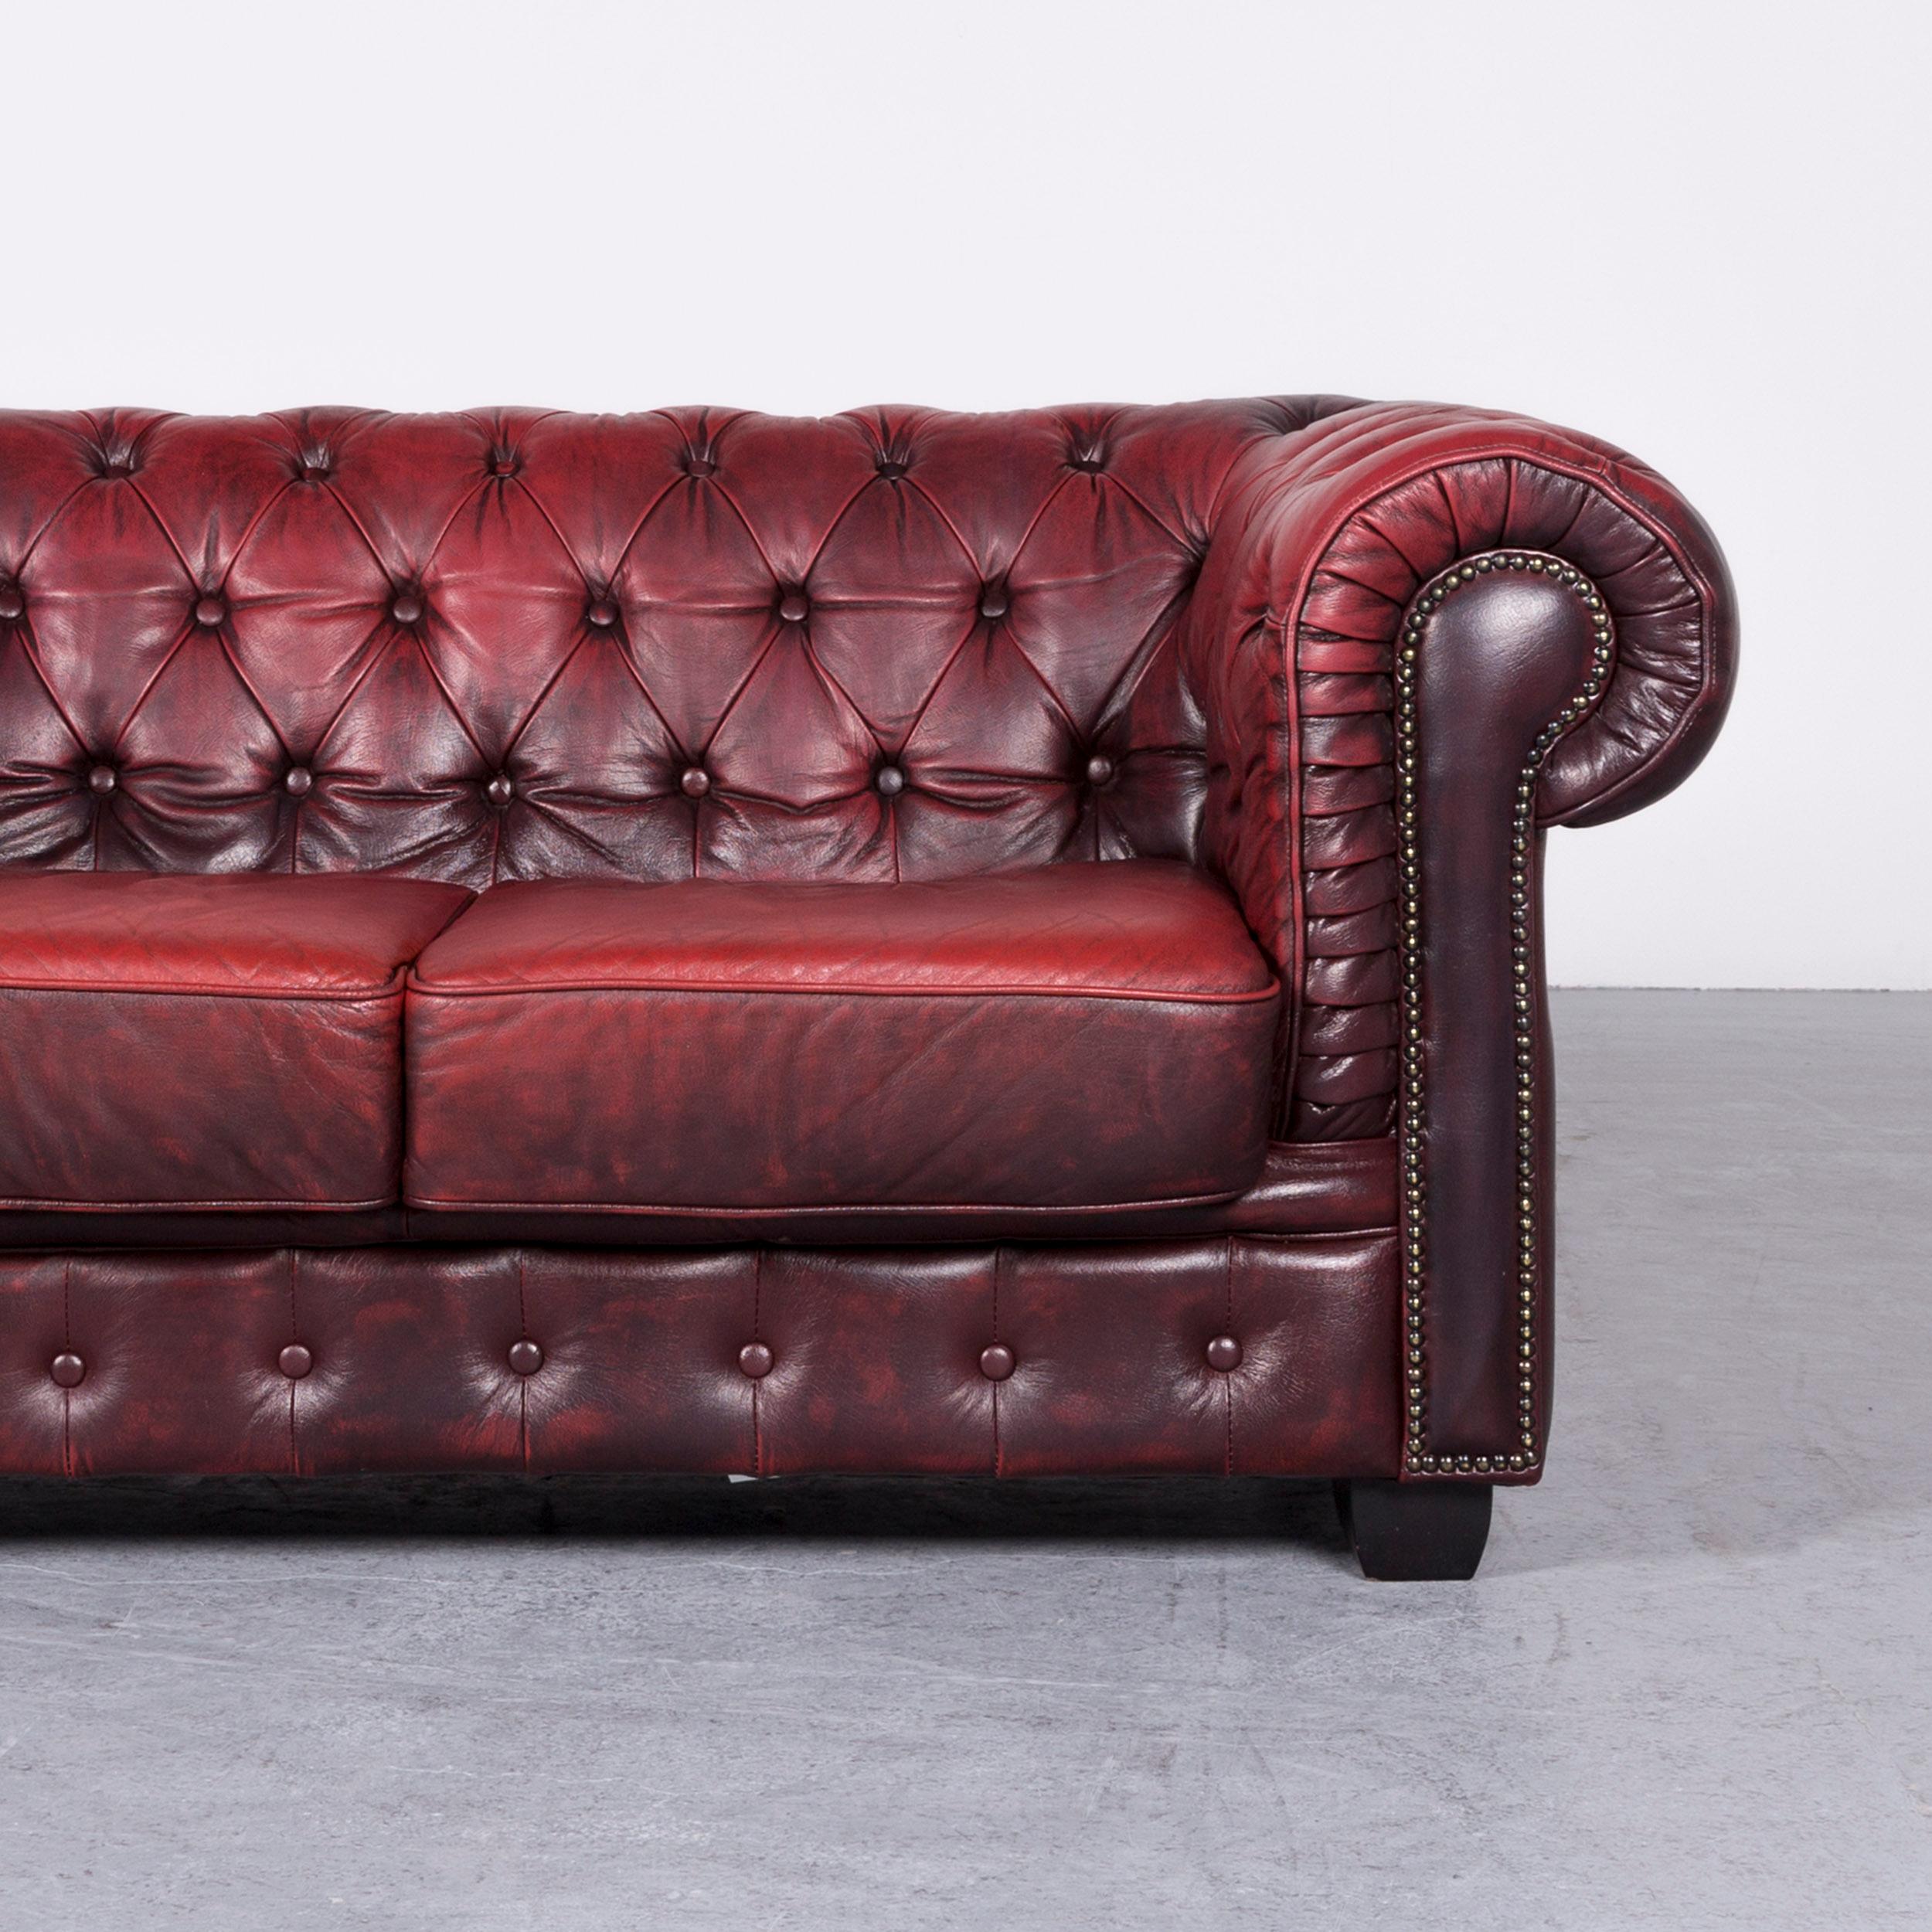 Chesterfield Leather Sofa Set Red Two-Seat Three-Seat Vintage Couch 11